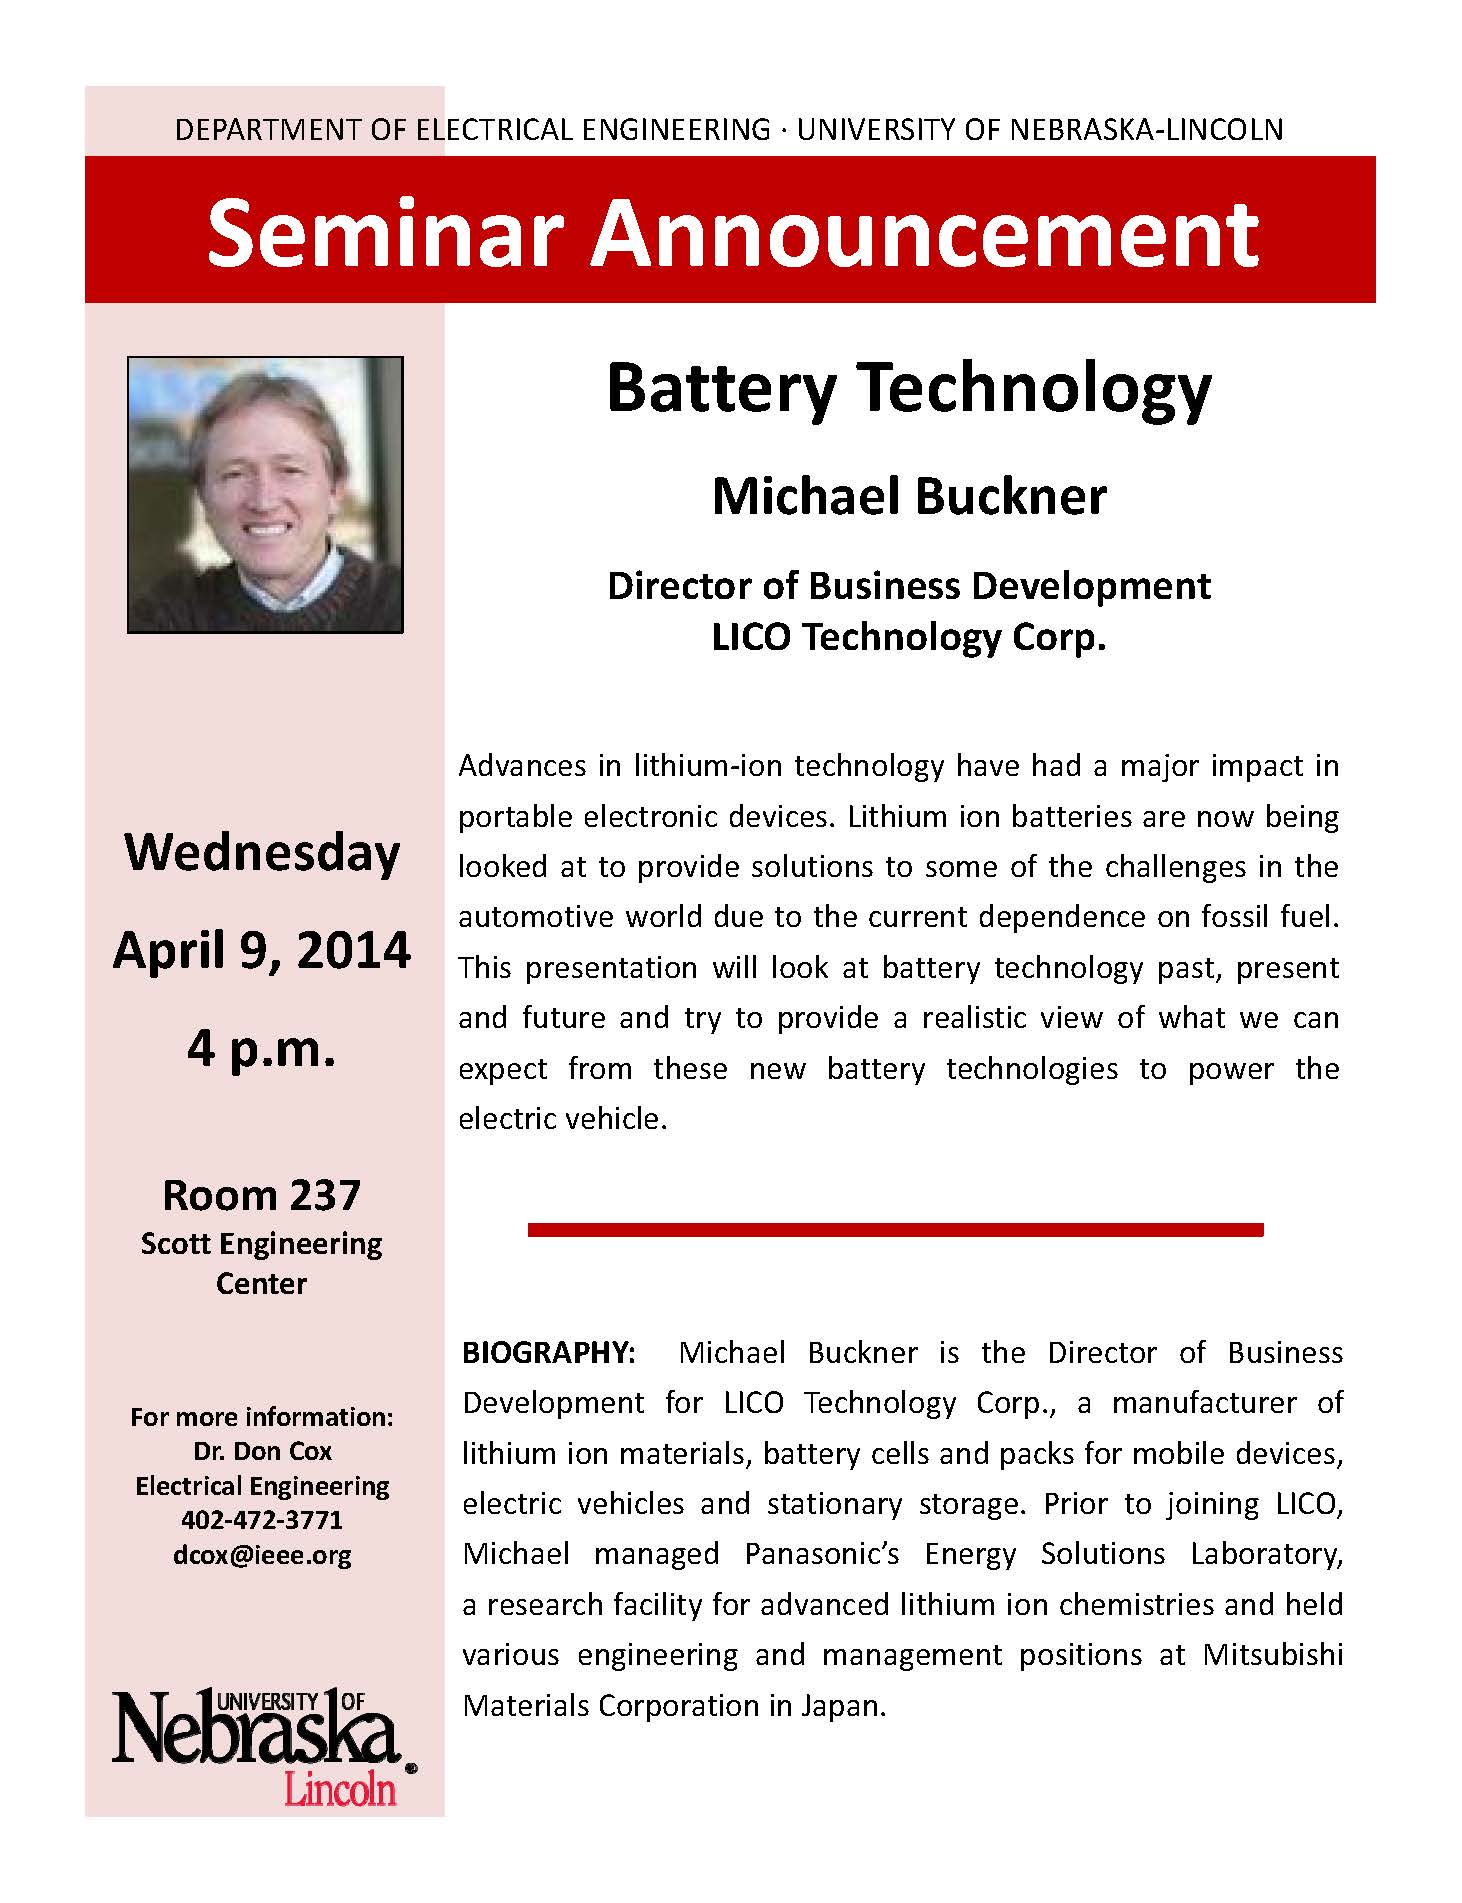 Battery Technology Seminar, April 9, looks at applications for electric vehicles